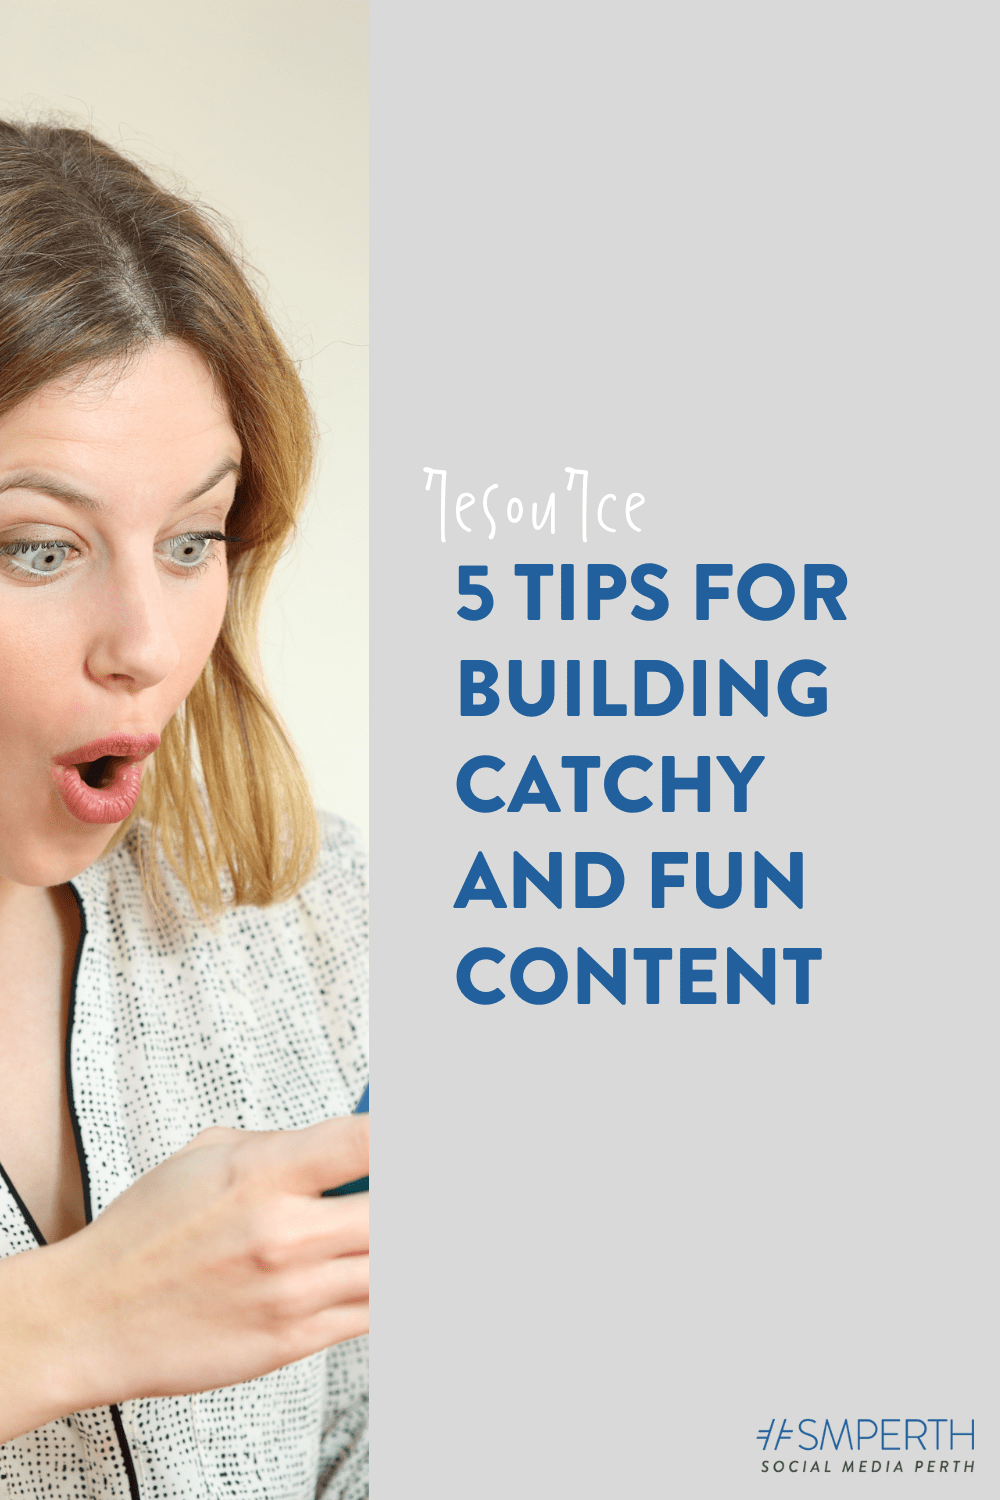 5 tips for building catchy and fun content